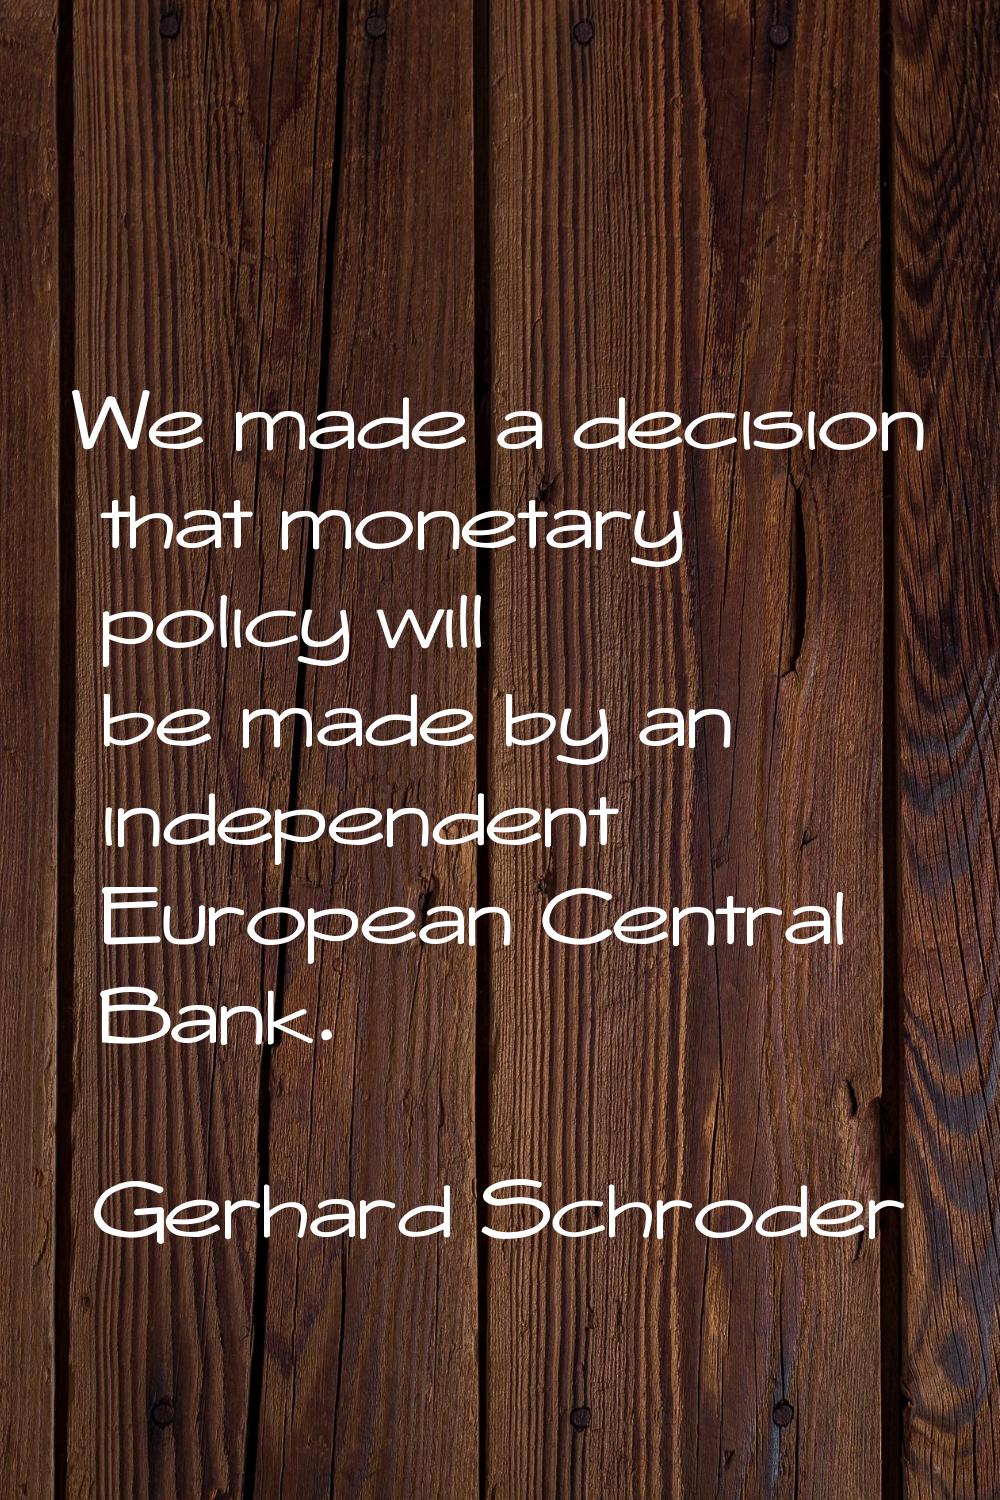 We made a decision that monetary policy will be made by an independent European Central Bank.